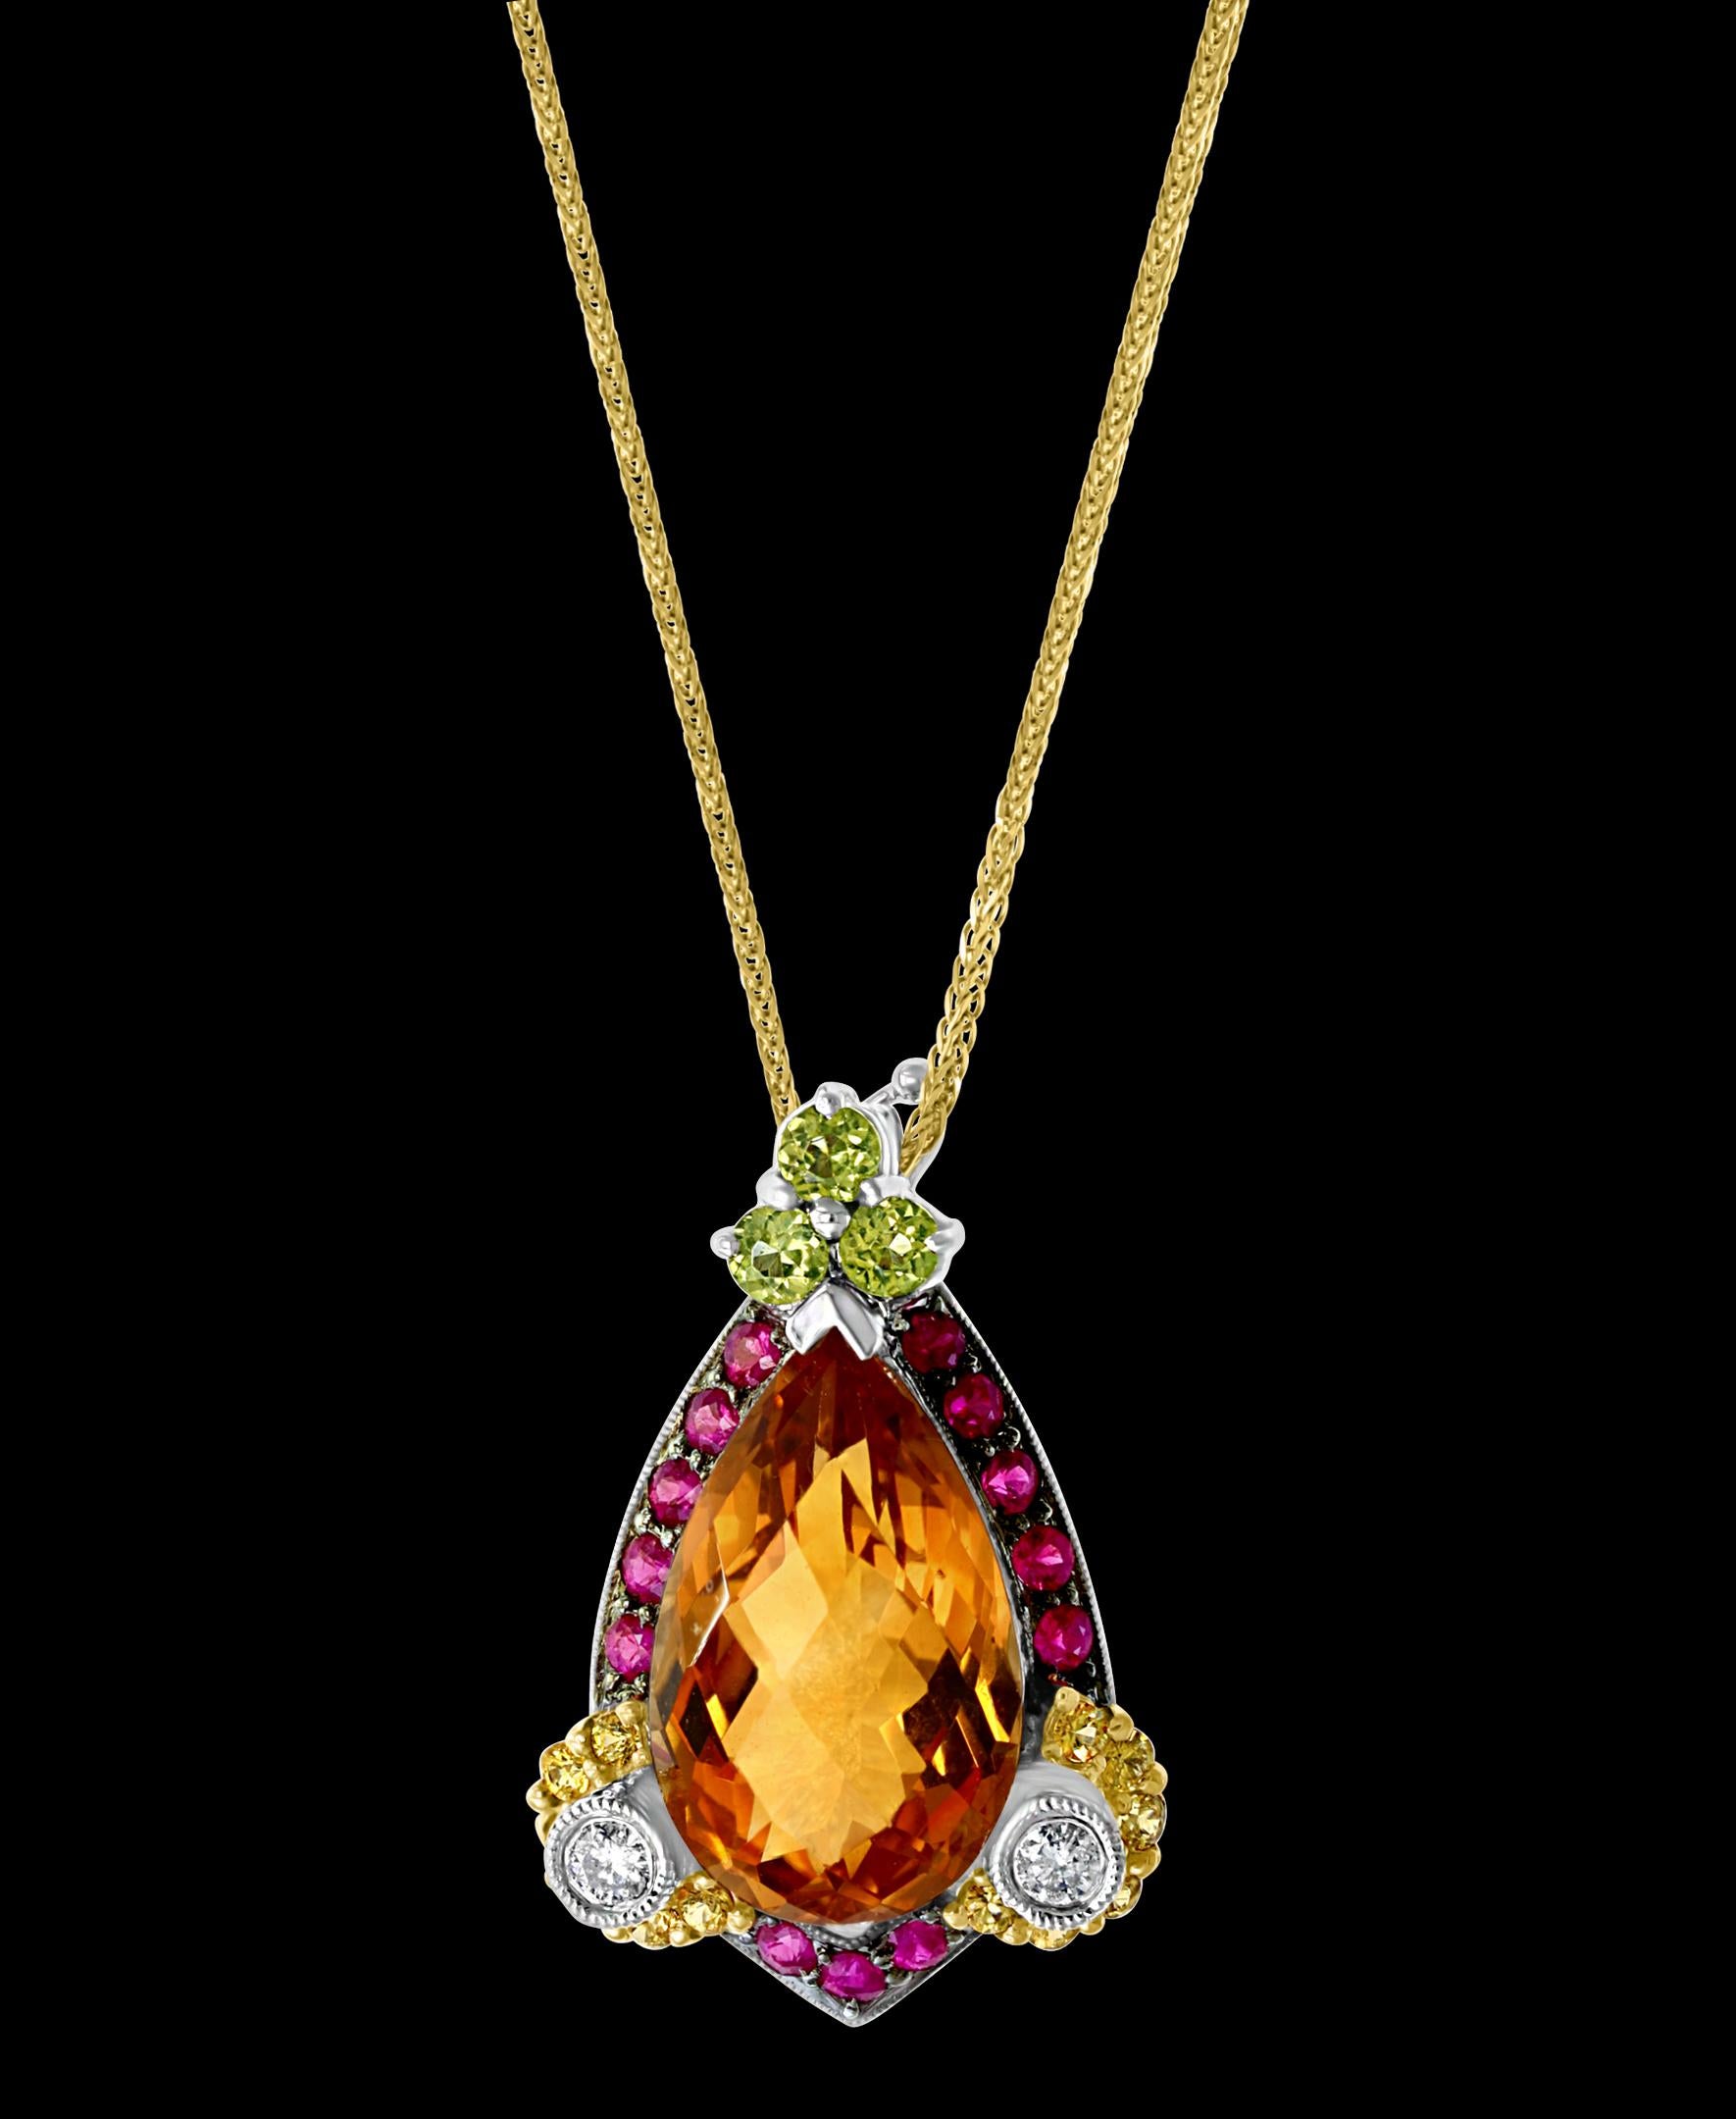 Checkerboard  Citrine Ruby Diamond  Pendent/Necklace 14 Karat  Yellow Gold With Chain
This Citrin Drop Pendant necklace is a eye-catching pendant necklace . It features a large  fine approximately 9 ct  Pear shape Citrine which has checkerboard